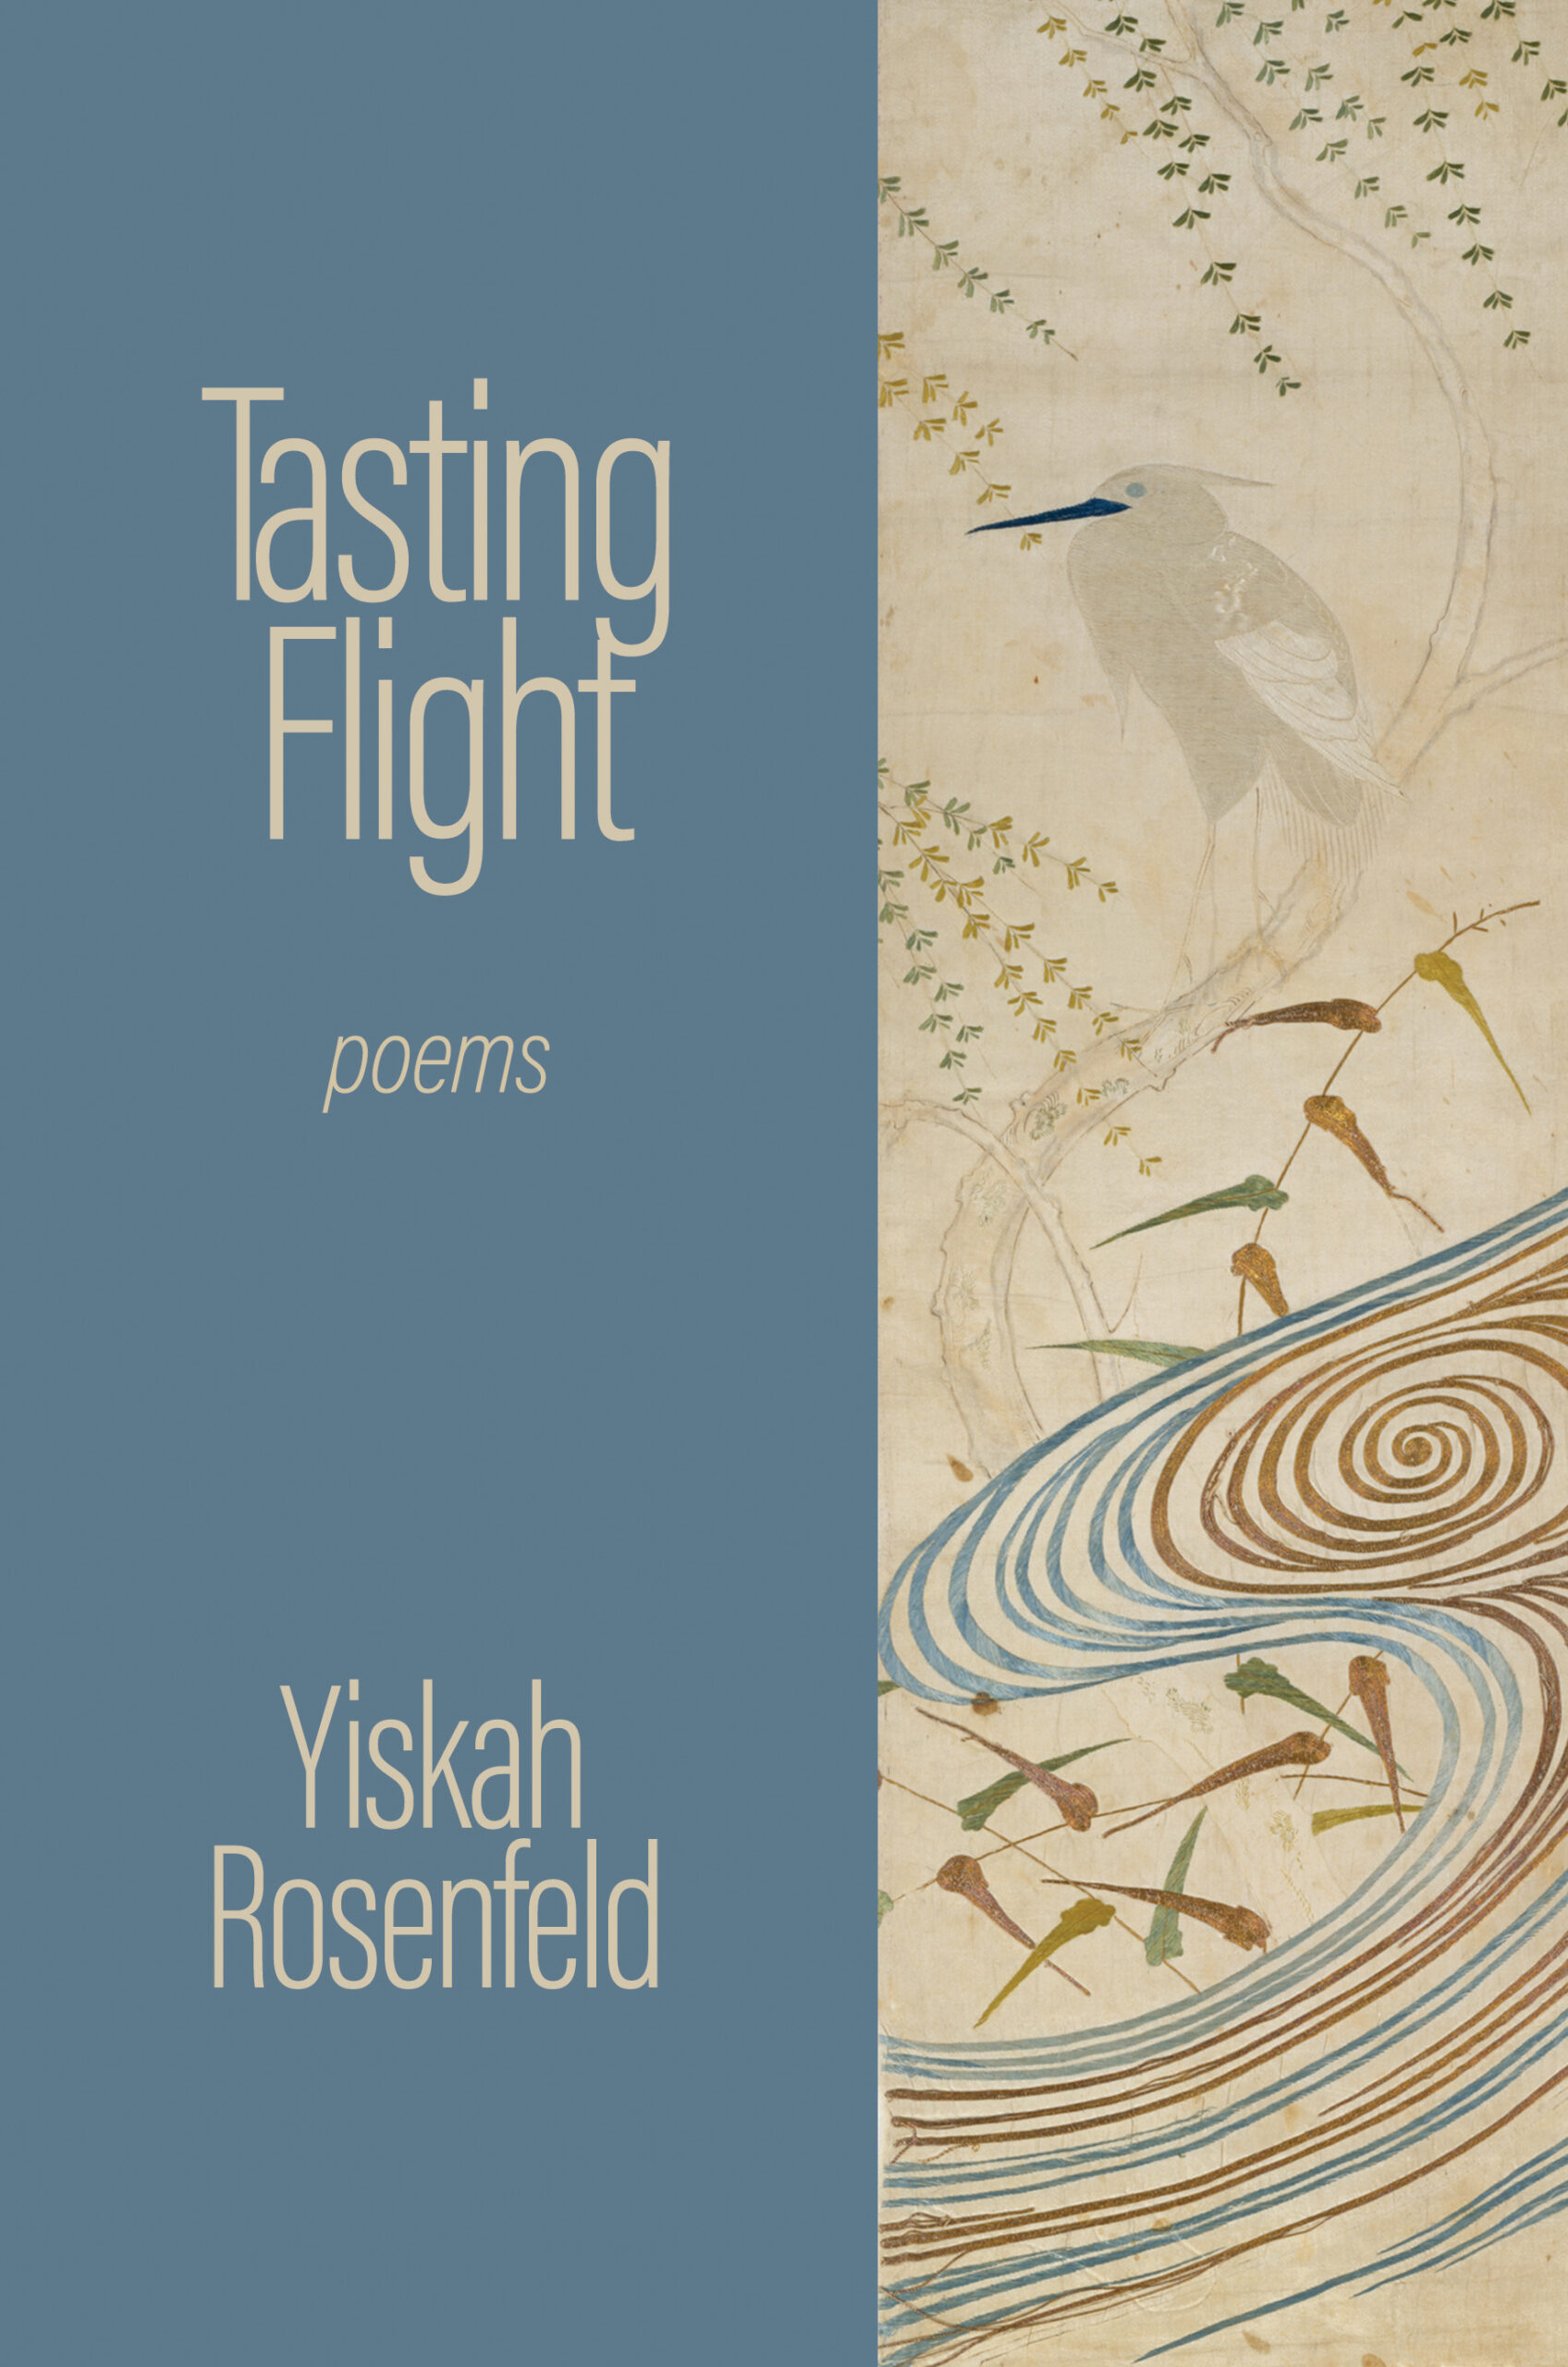 front cover of Tasting Flight: poems by Yiskah Rosenfeld. With a gray-blue panel on the left and a panel on the right showing silk from a Japanese Noh costume. The prominent feature is an egret with a long blue bill. Below that is a swirly water pattern, willow branches and fish.